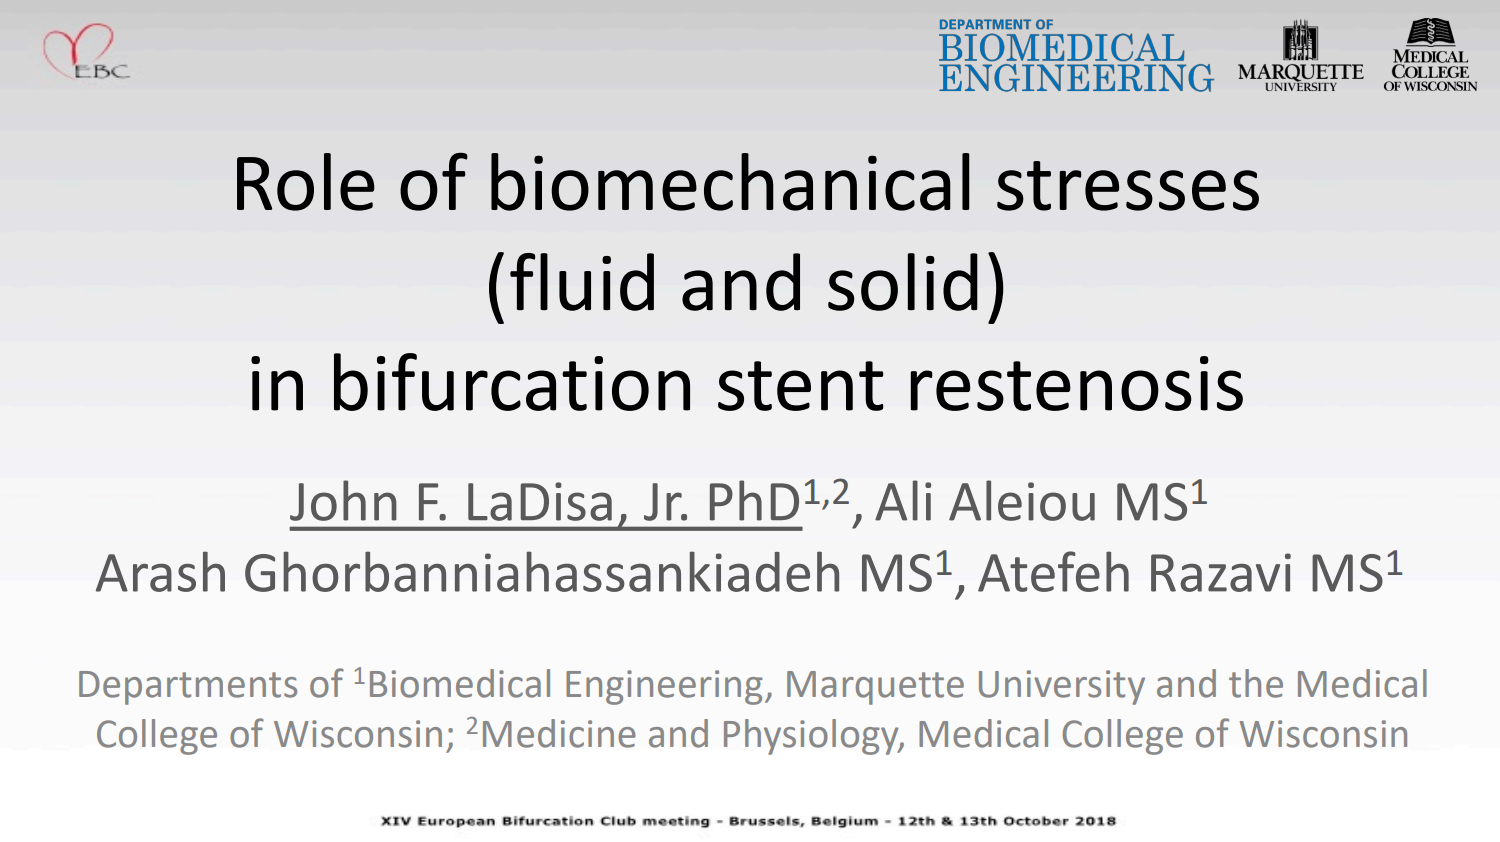 You are currently viewing Role of biomechanical stresses (fluid and solid) in bifurcation stent restenosis